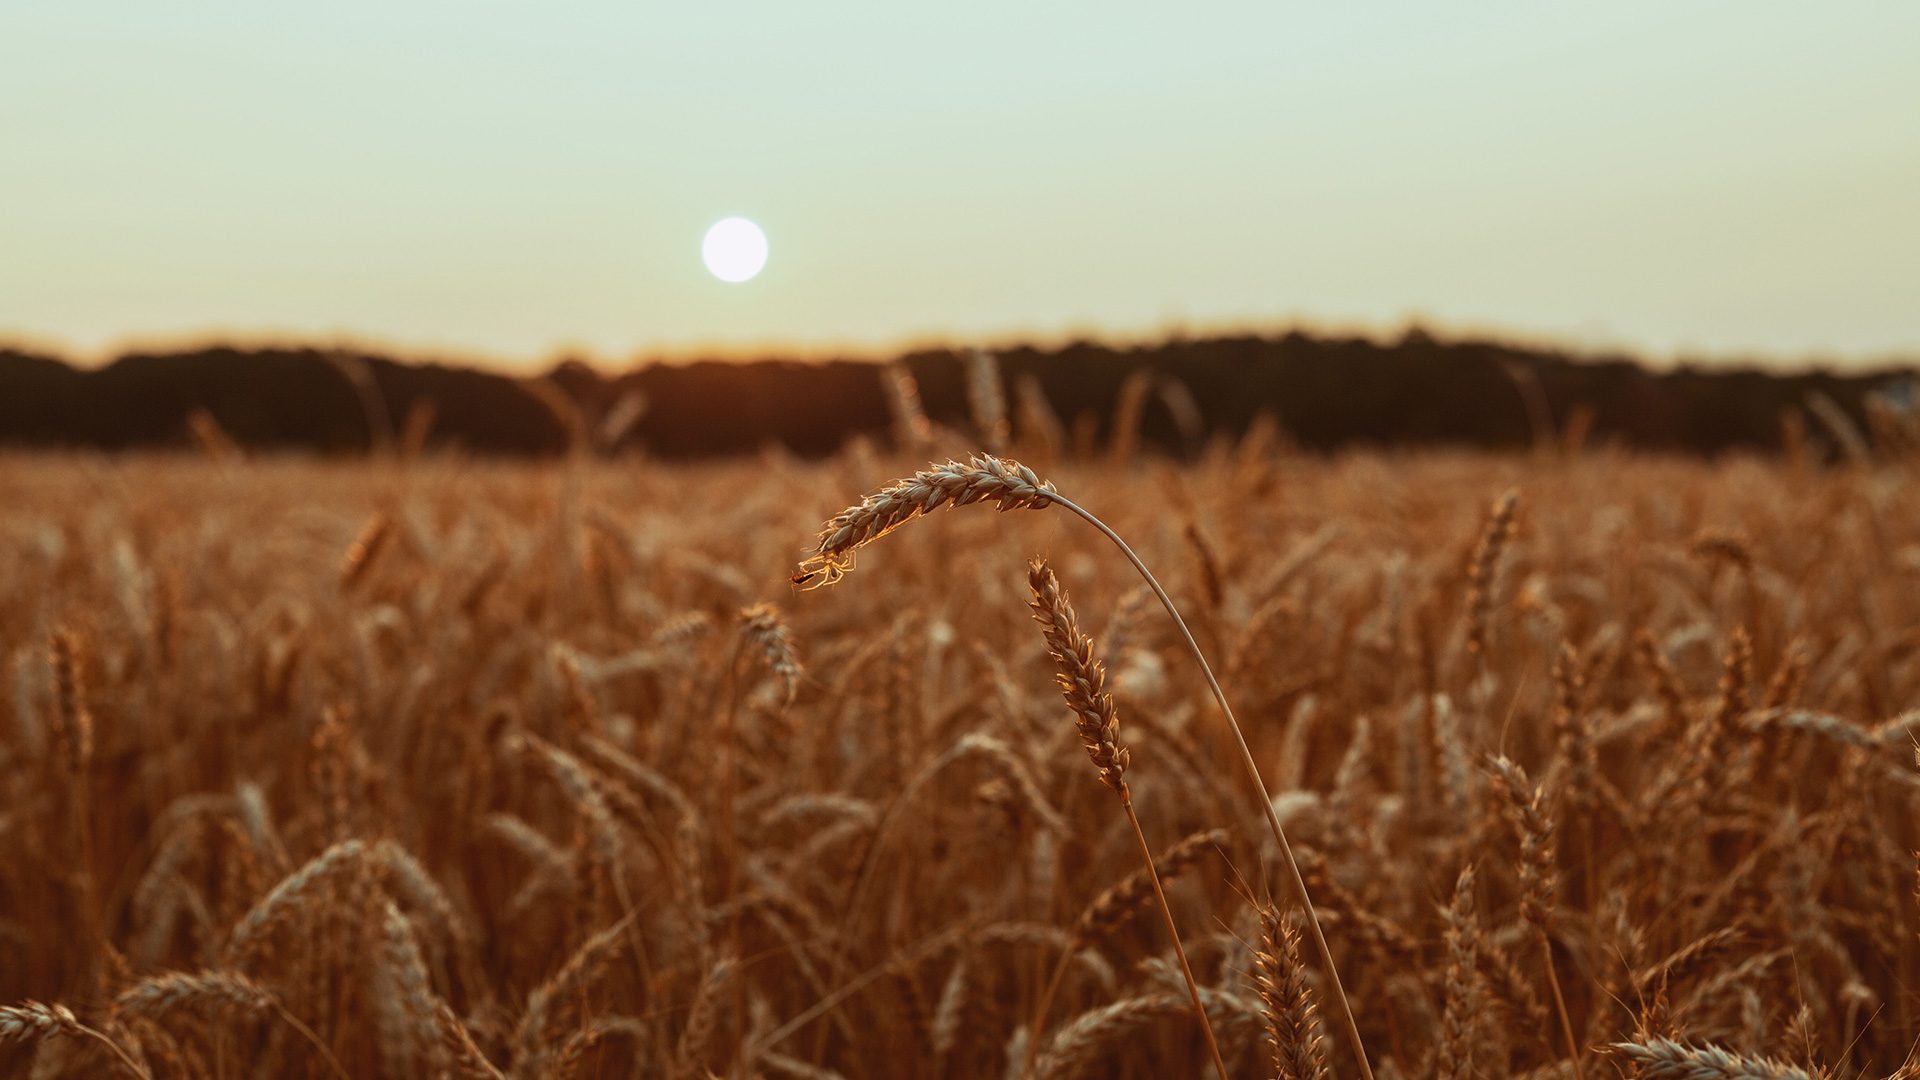 Stock photo of a wheat field at sunset, focused on two spikes of wheat in the foreground